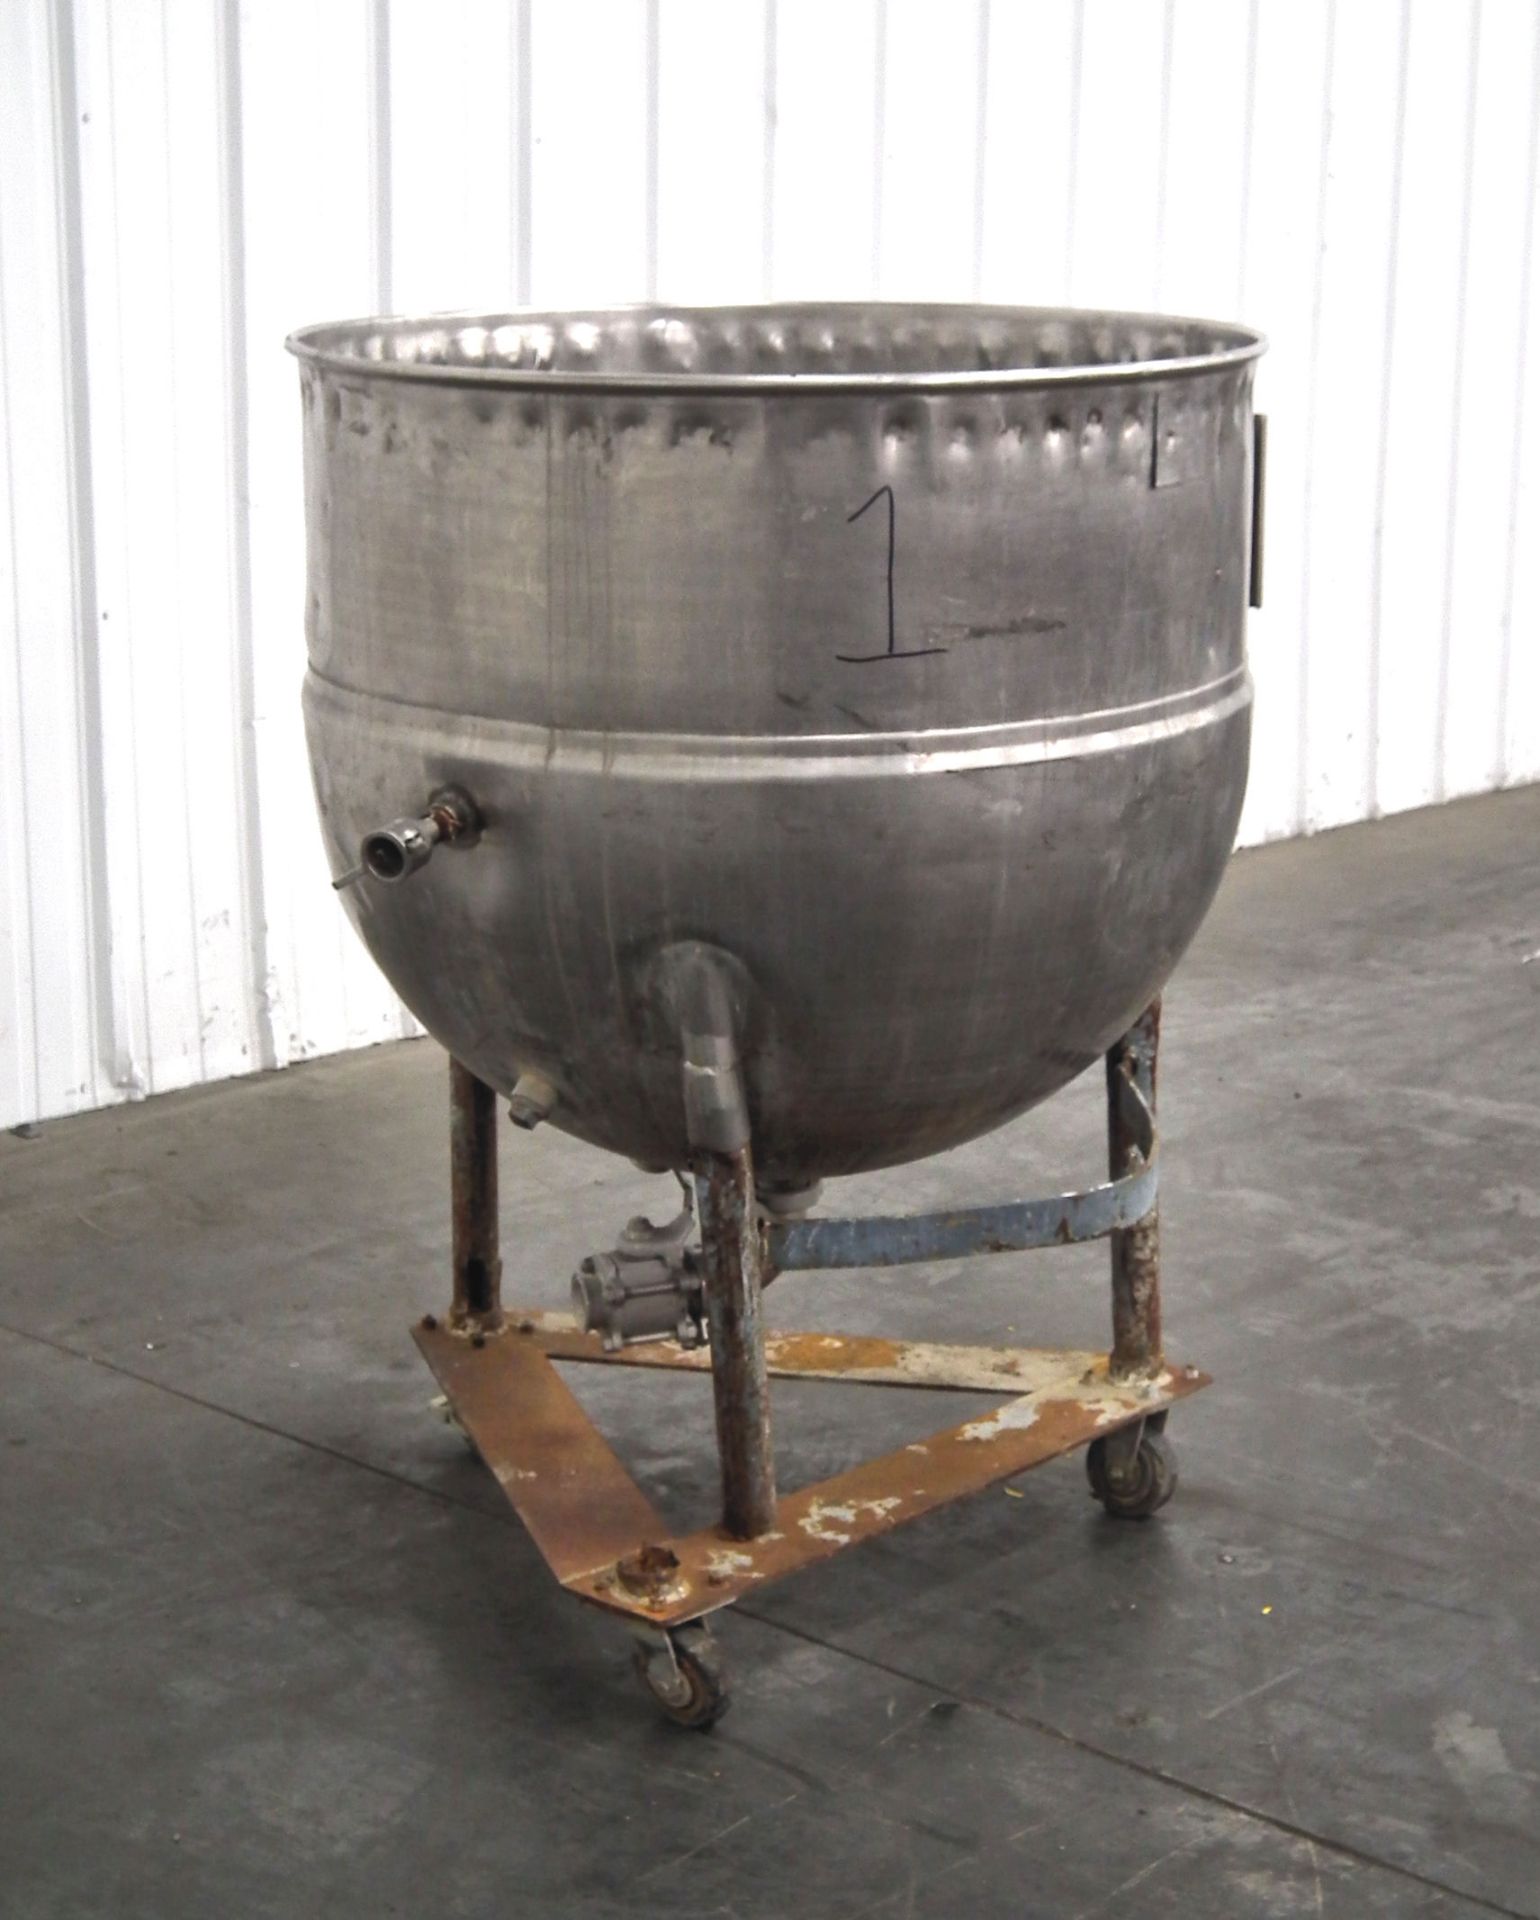 Groen N 100 Half Jacketed Kettle 110 Gallons A2252 - Image 3 of 9